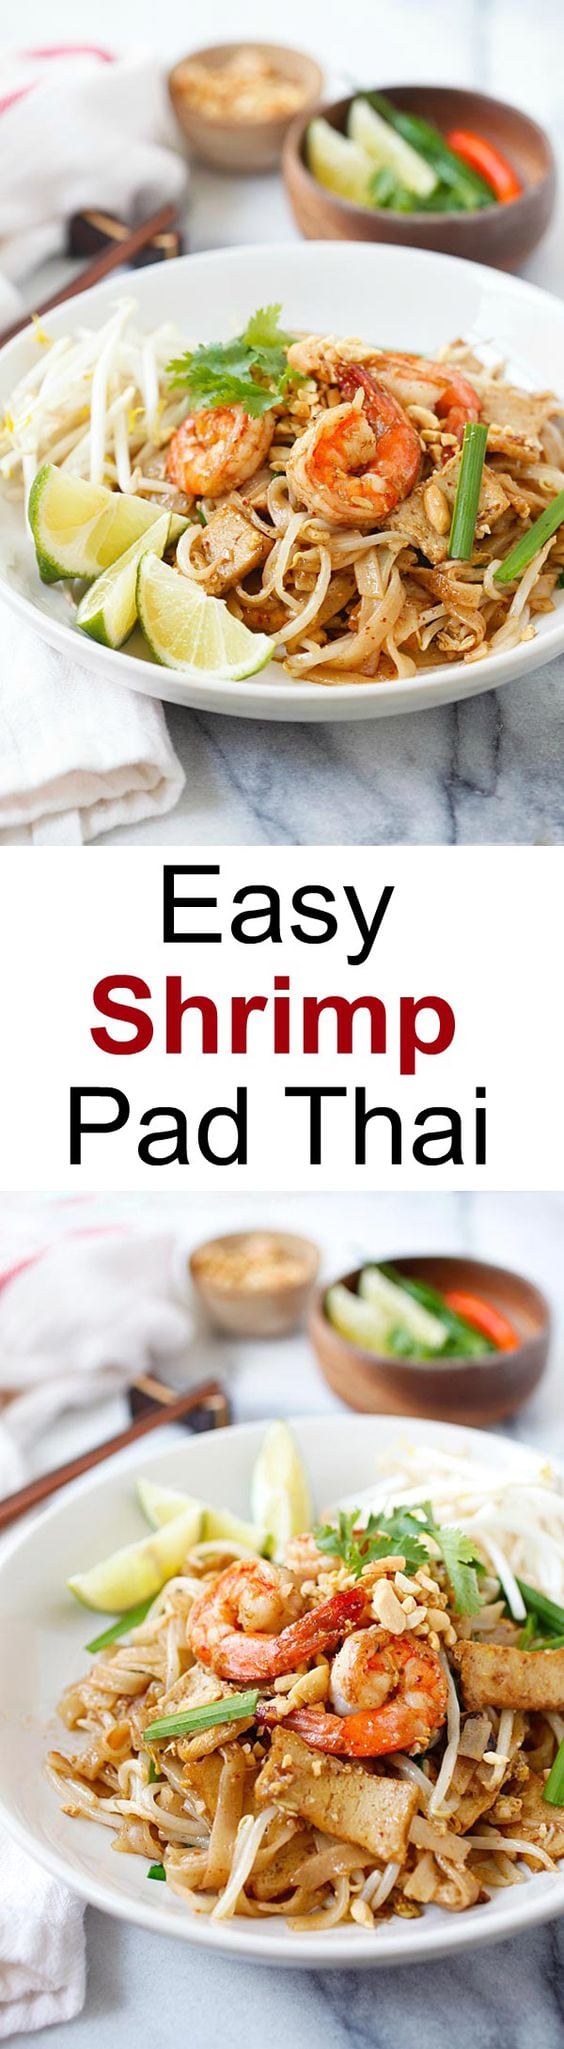 Shrimp Pad Thai – easiest and best Pad Thai recipe with shrimp. This homemade Thai fried noodle is better and healthier than takeout | rasamalaysia.com